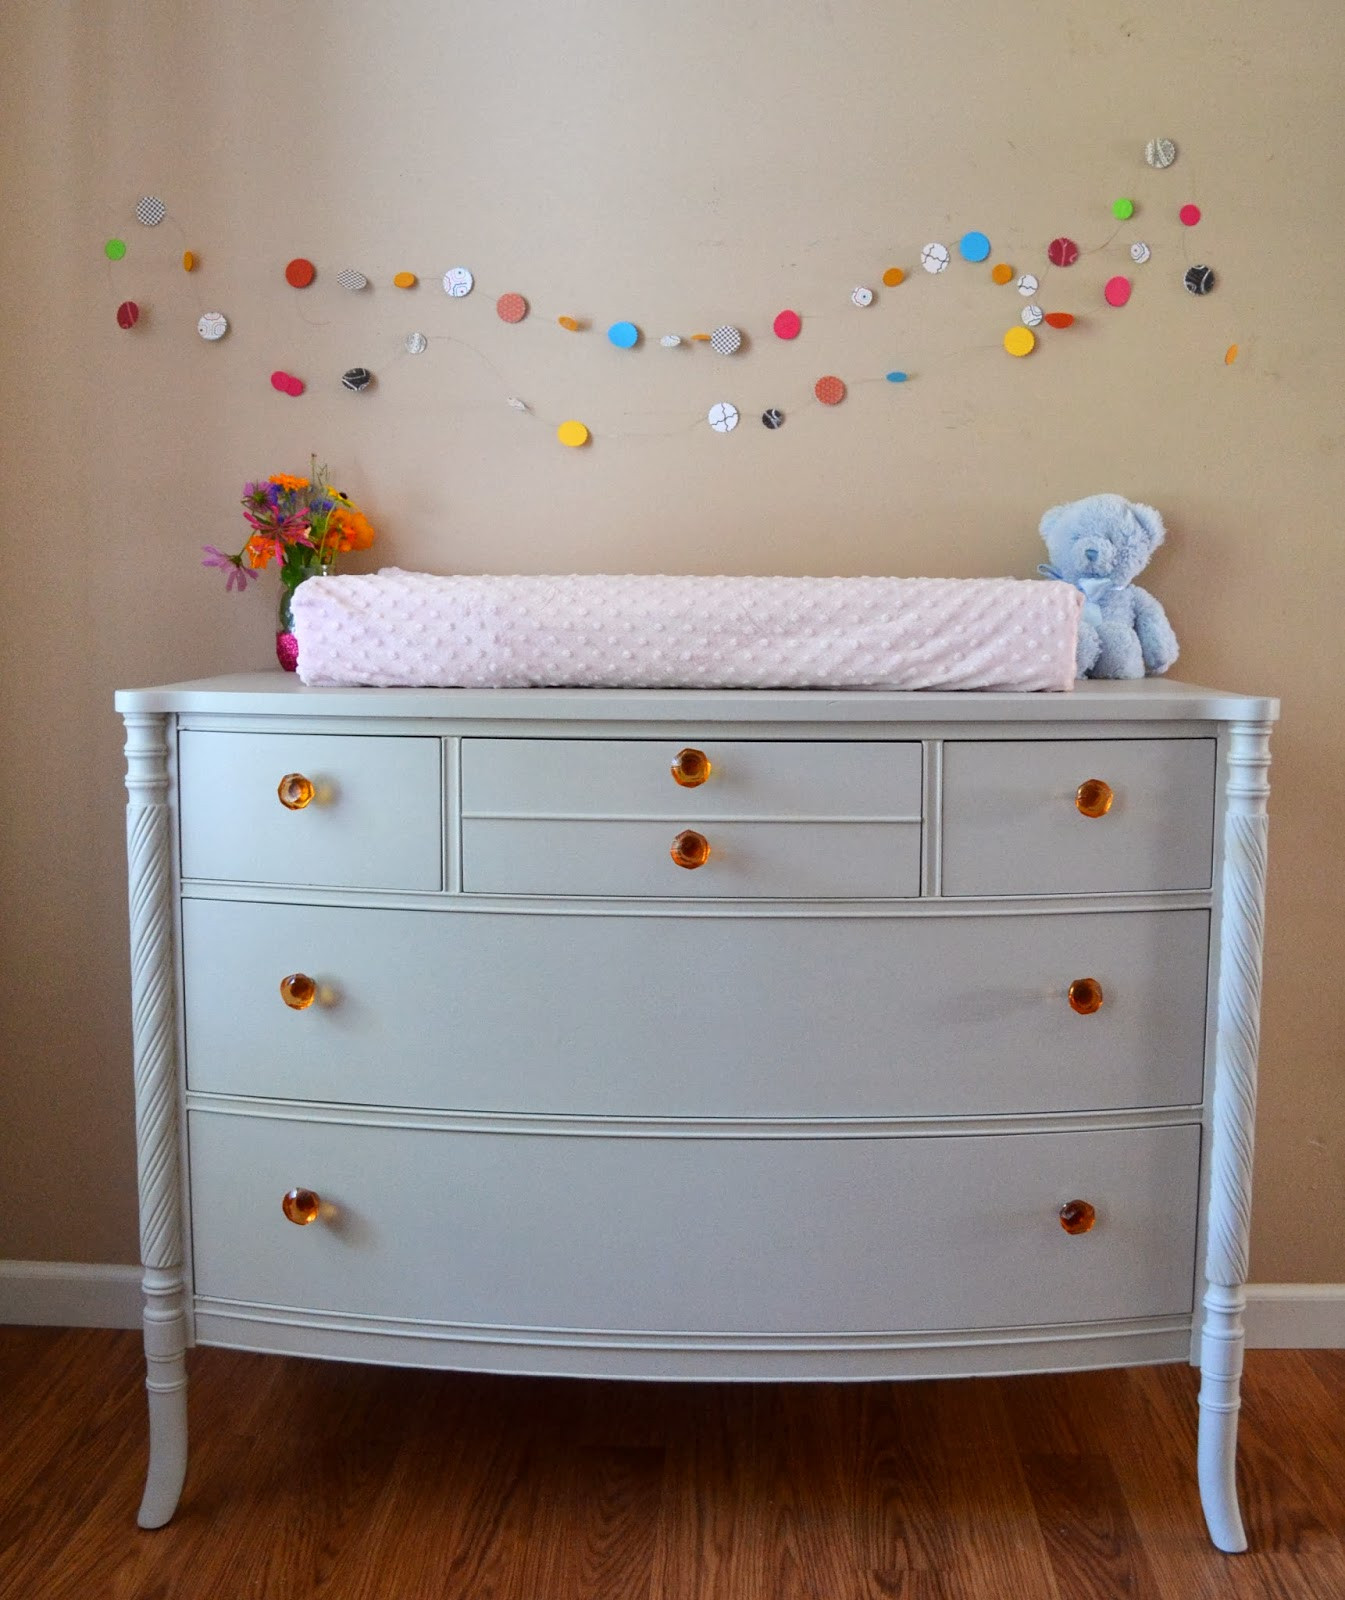 DIY Baby Change Table
 Helen Nichole Designs Baby Changing Table